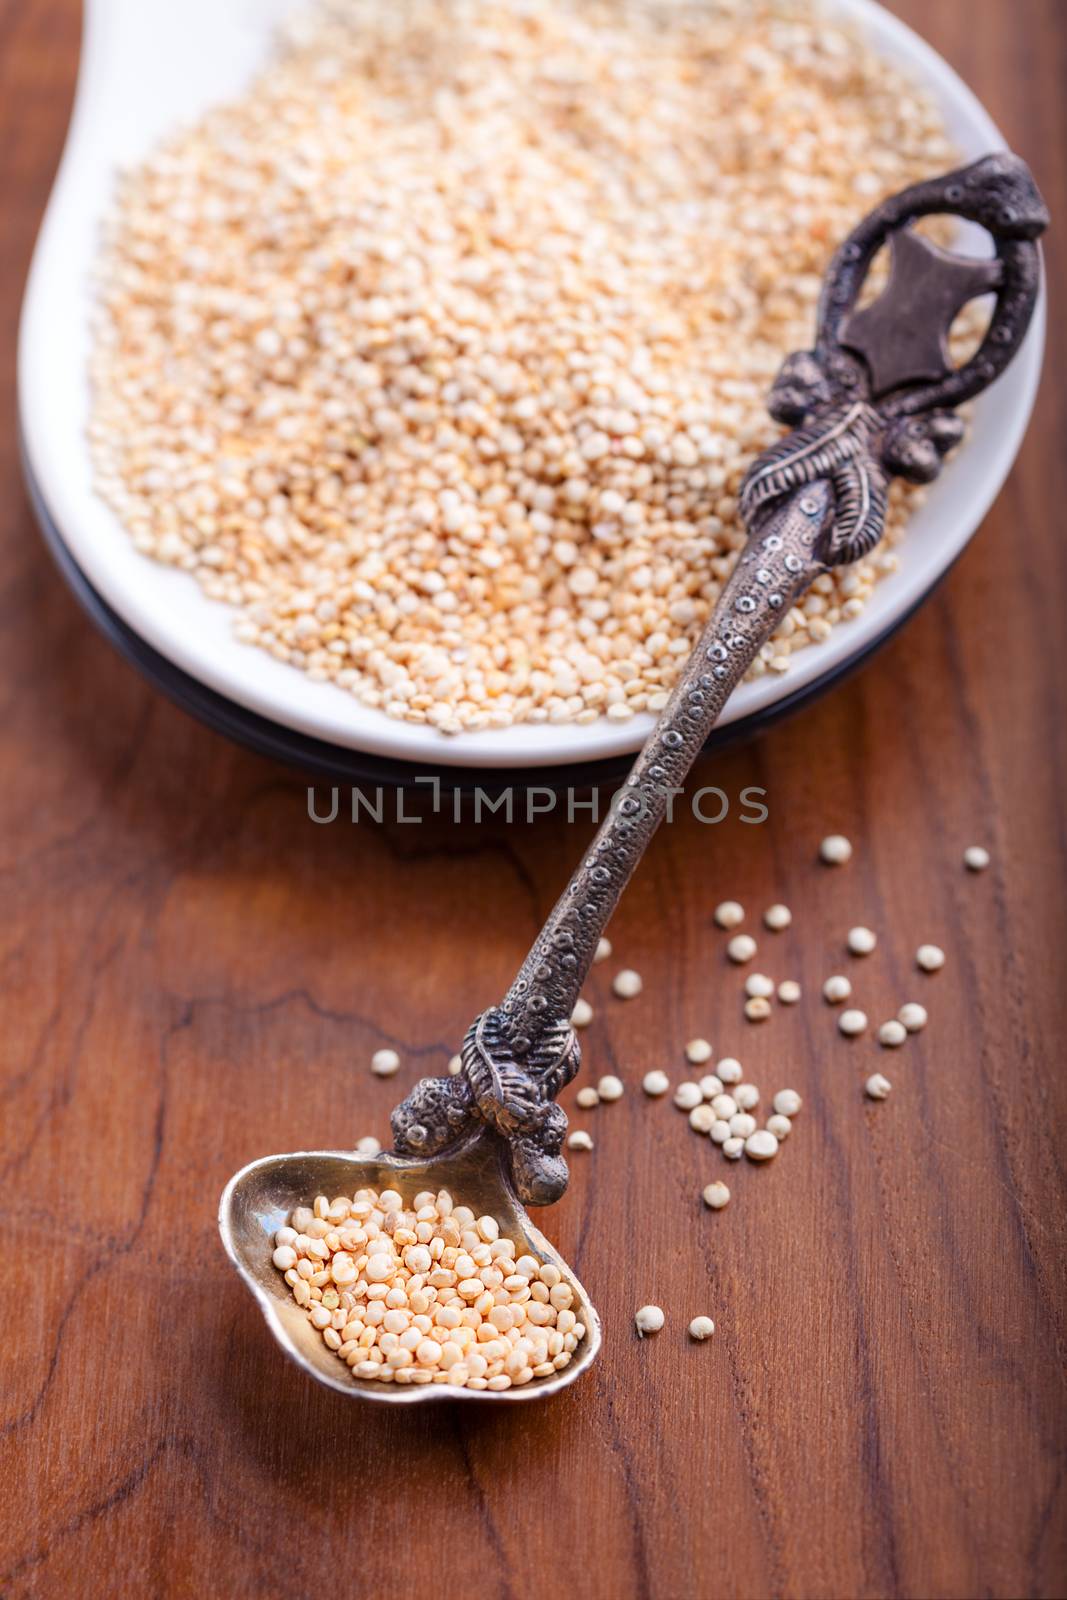 Raw quinoa wit a spoon on wooden table